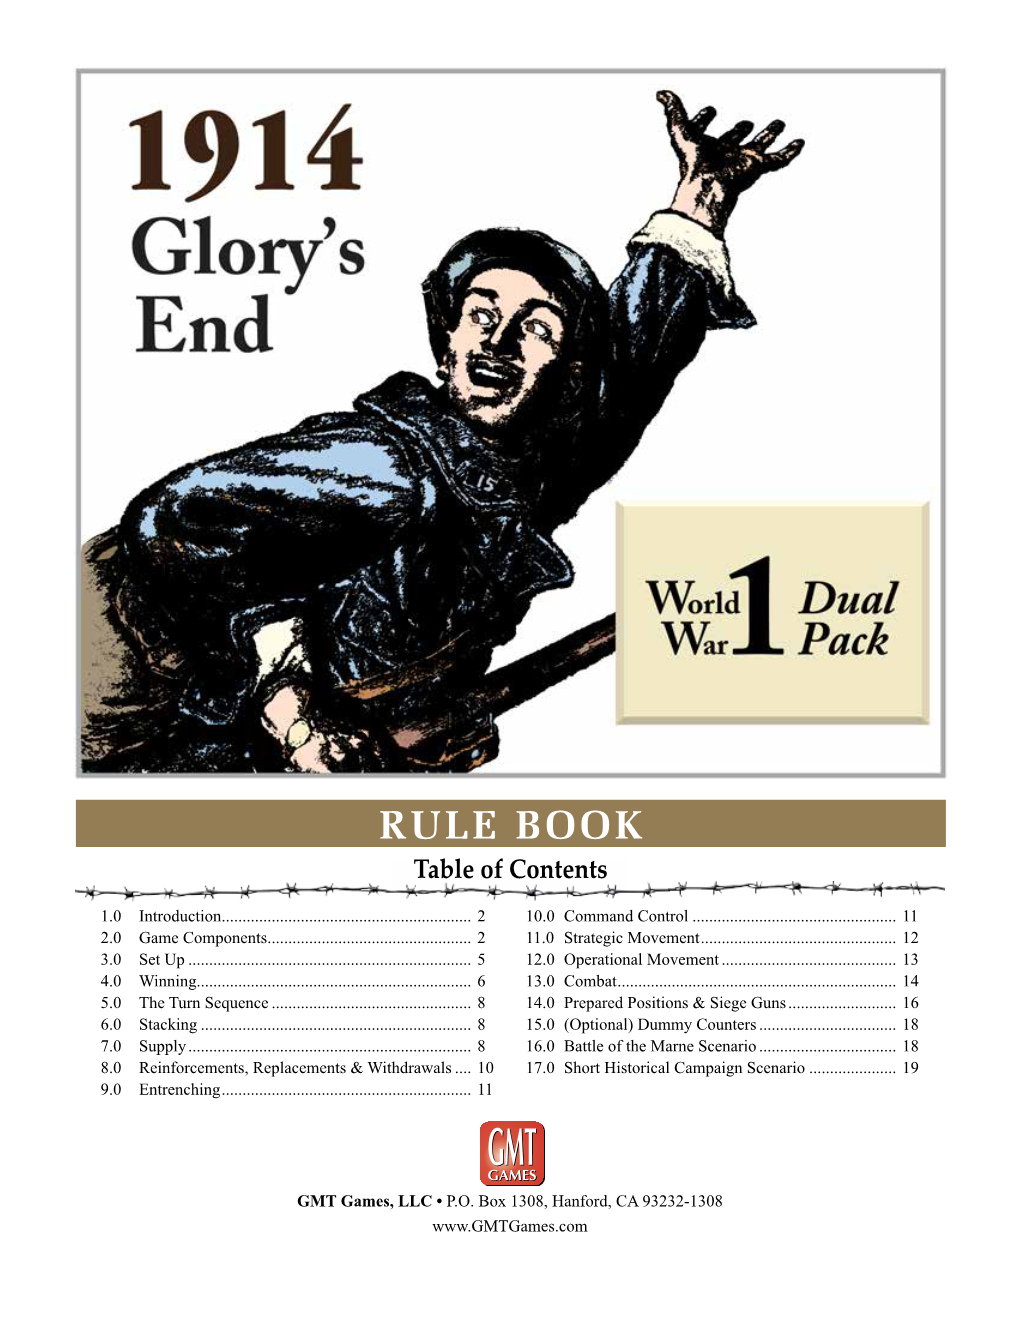 1914: Glory's End Rules